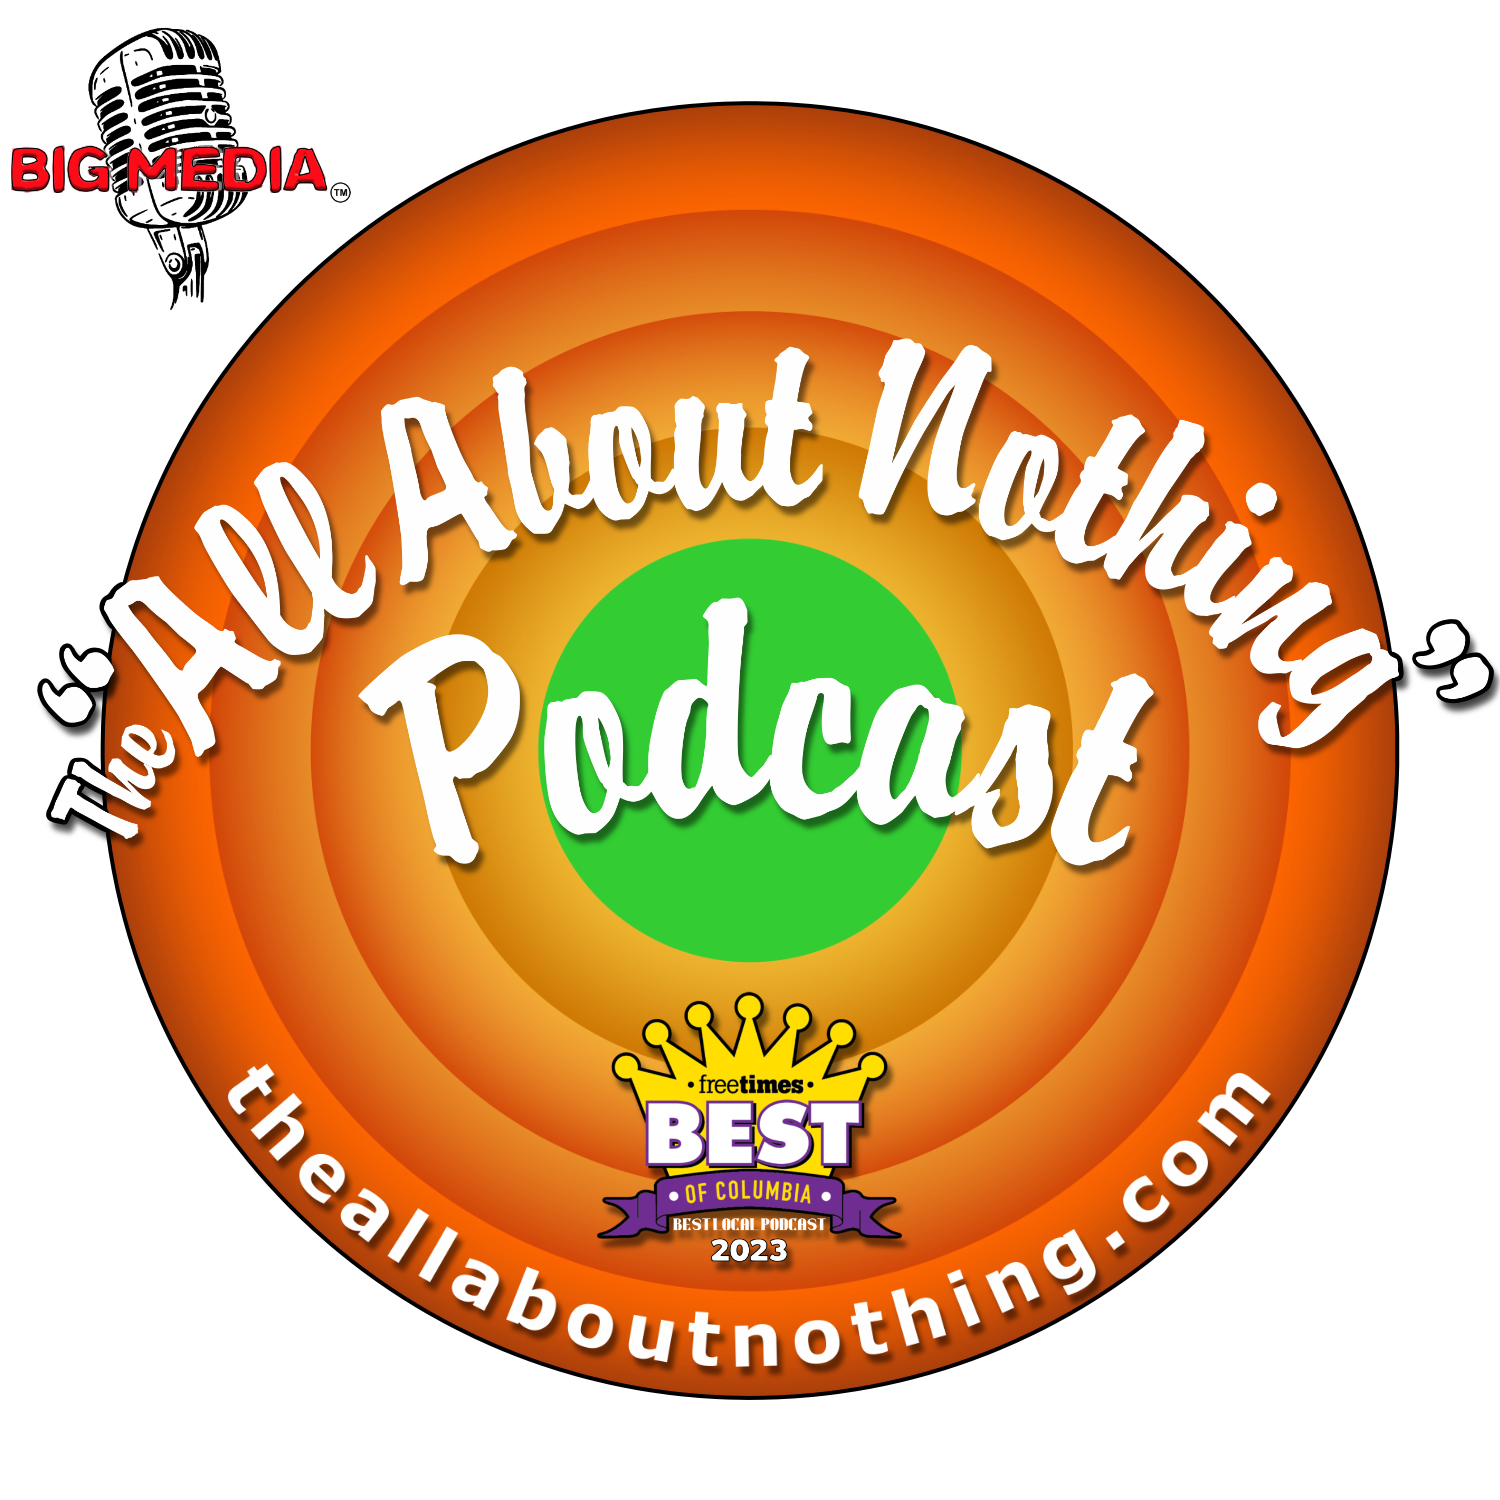 The All About Nothing: Podcast's Artwork